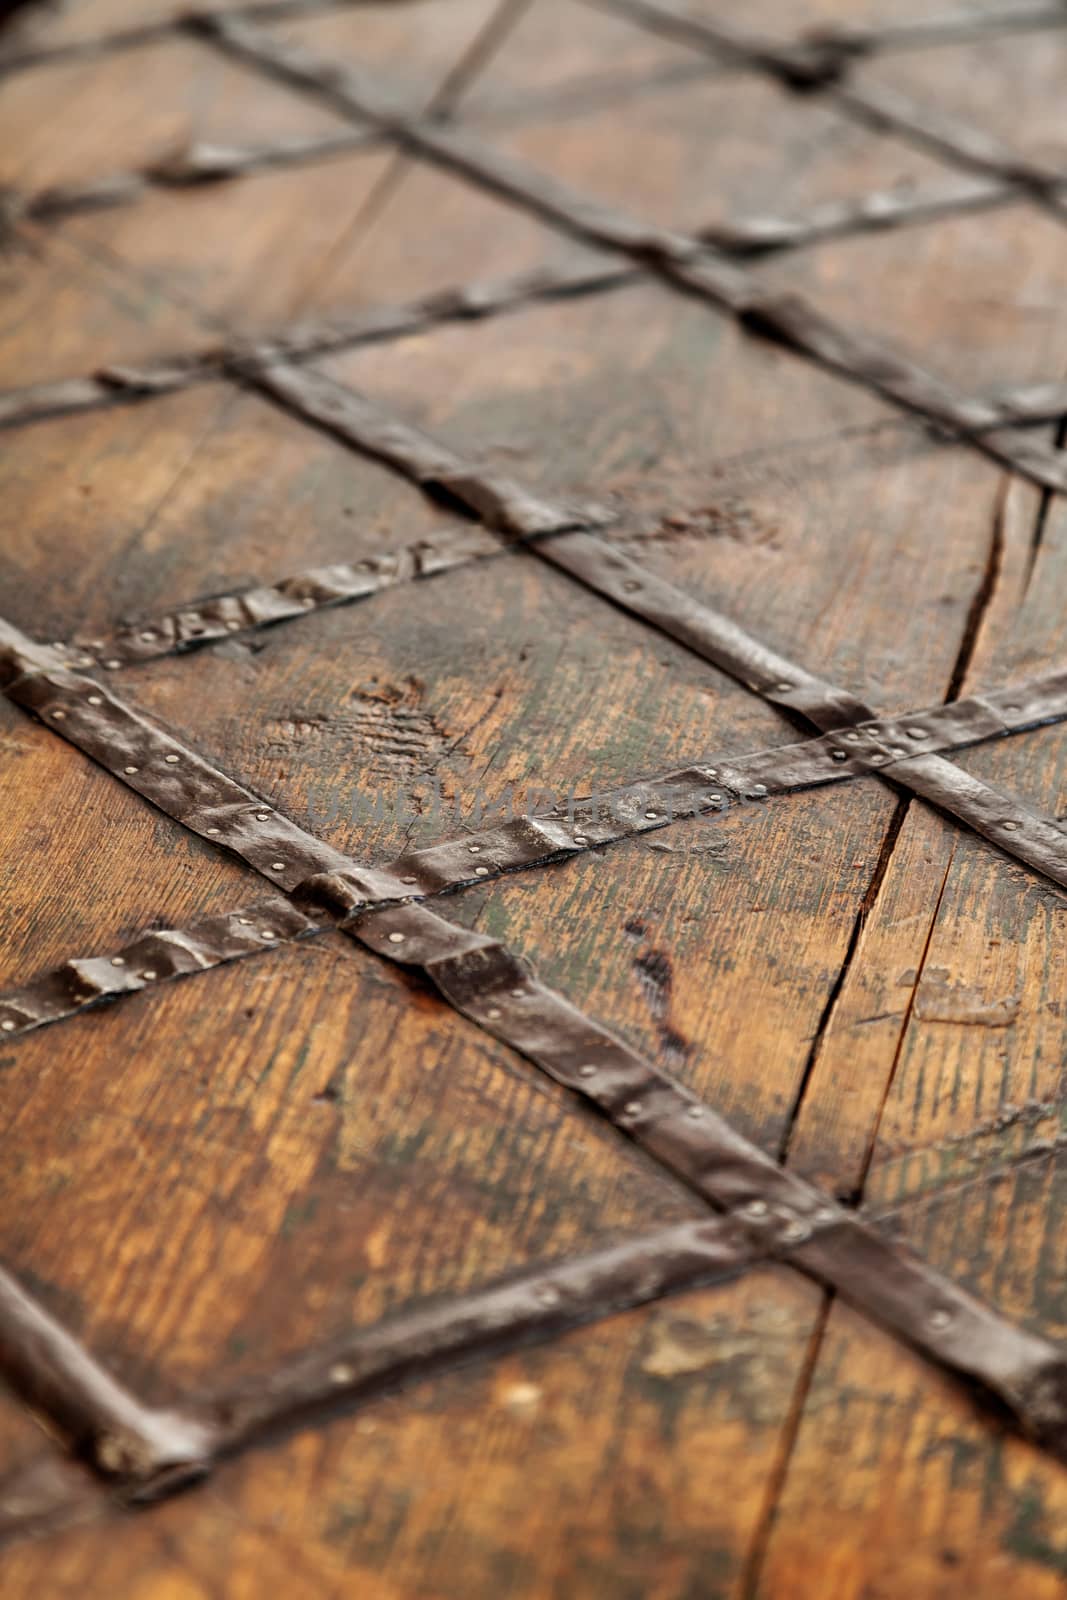 Fragment of an old brown wooden chest. Wood and forged metal on the chest cover.